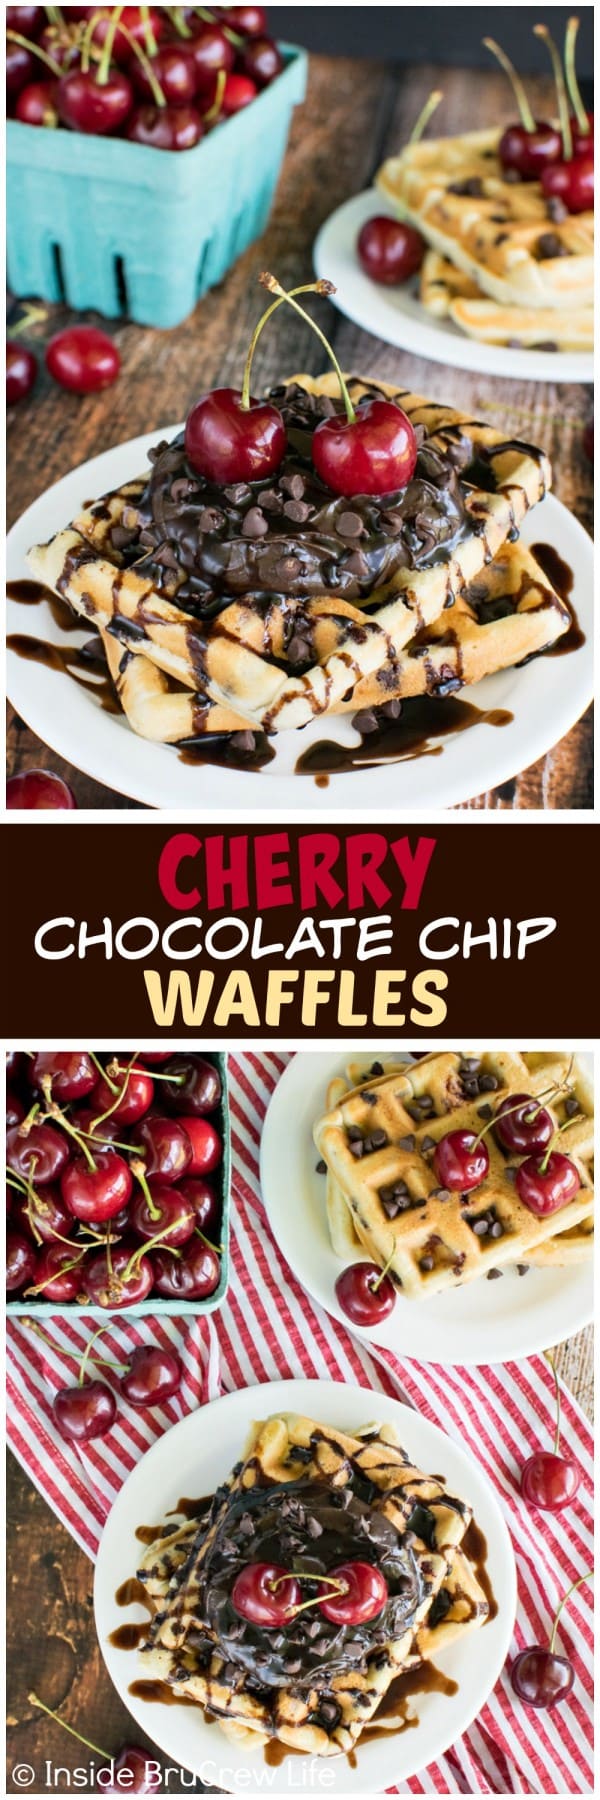 Cherry Chocolate Chip Waffles - these homemade waffles are loaded with fresh cherries and chocolate! Best breakfast recipe to start the day!!